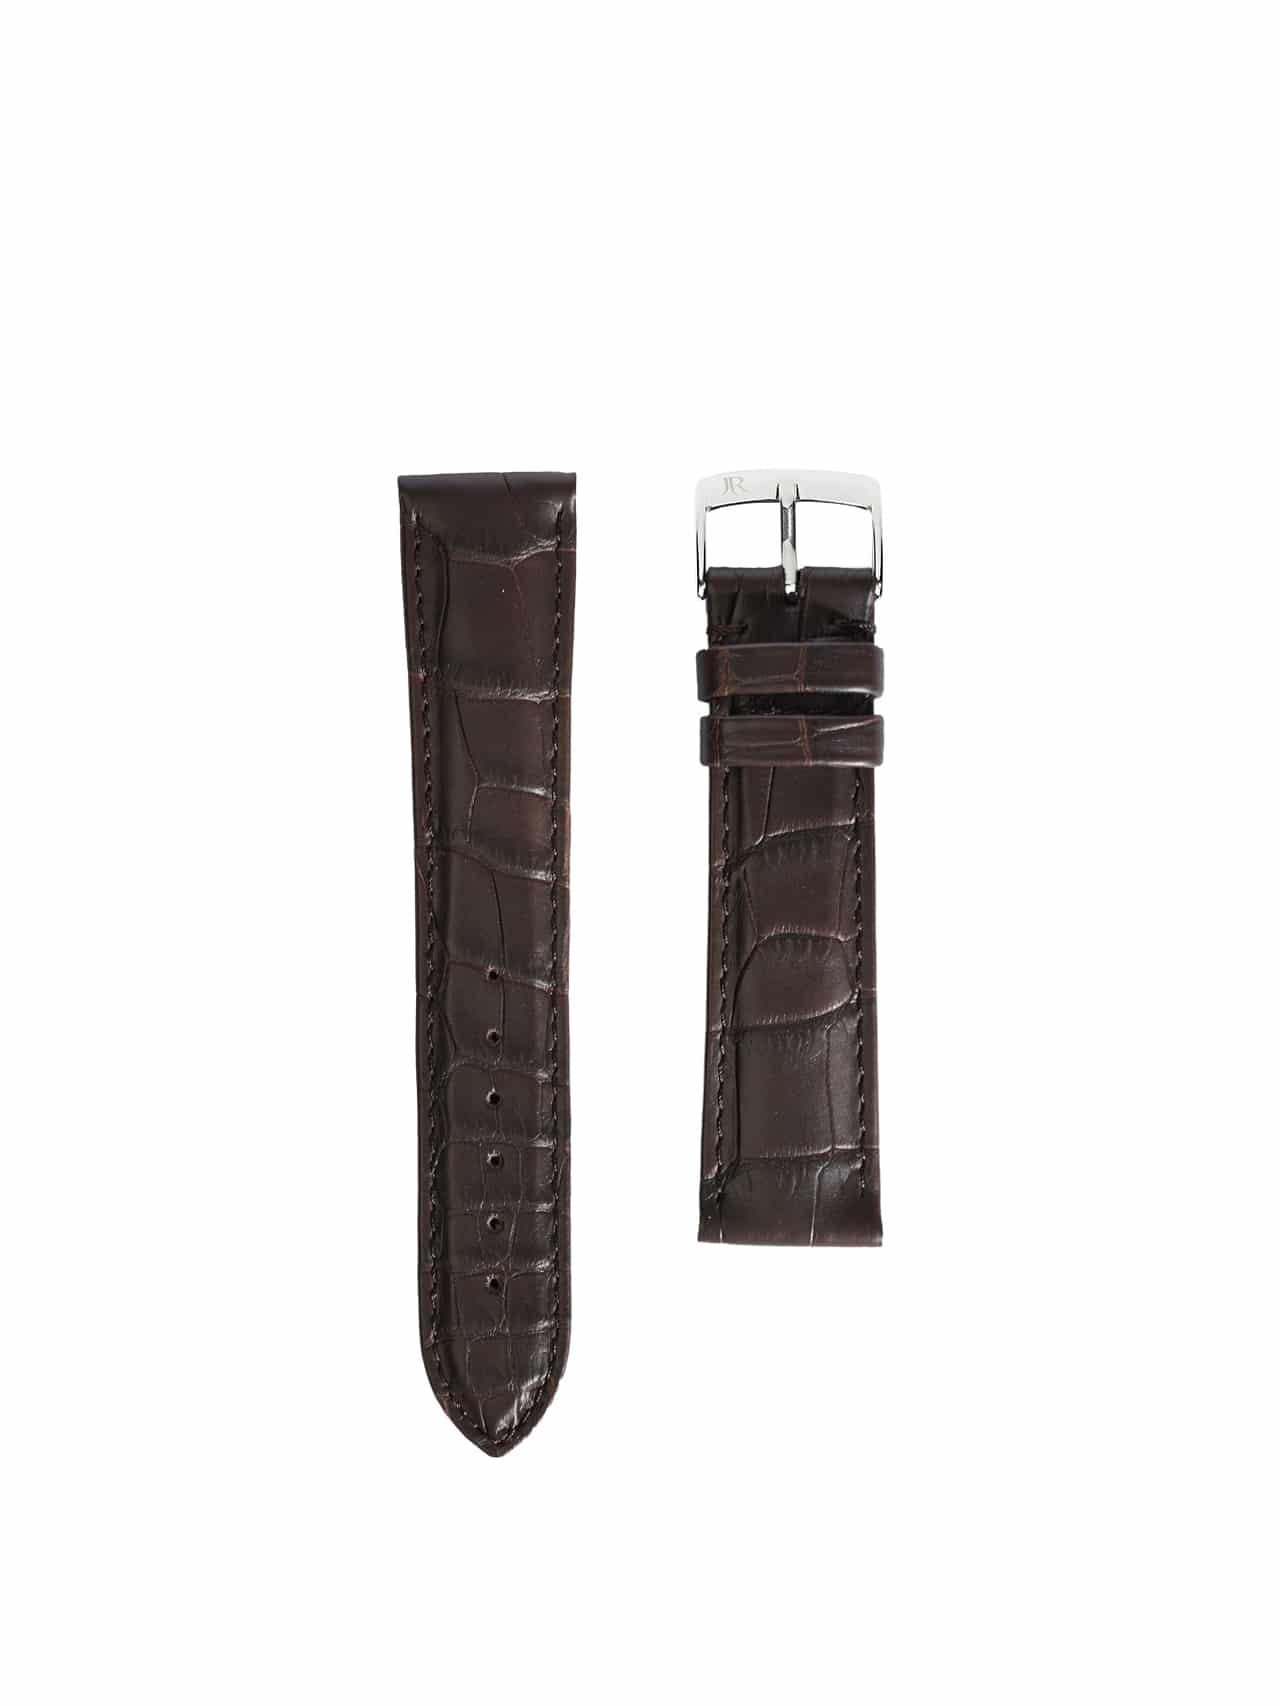 Watch strap Alligator water resistant 3.5 Brown - Manufacture Jean-Rousseau